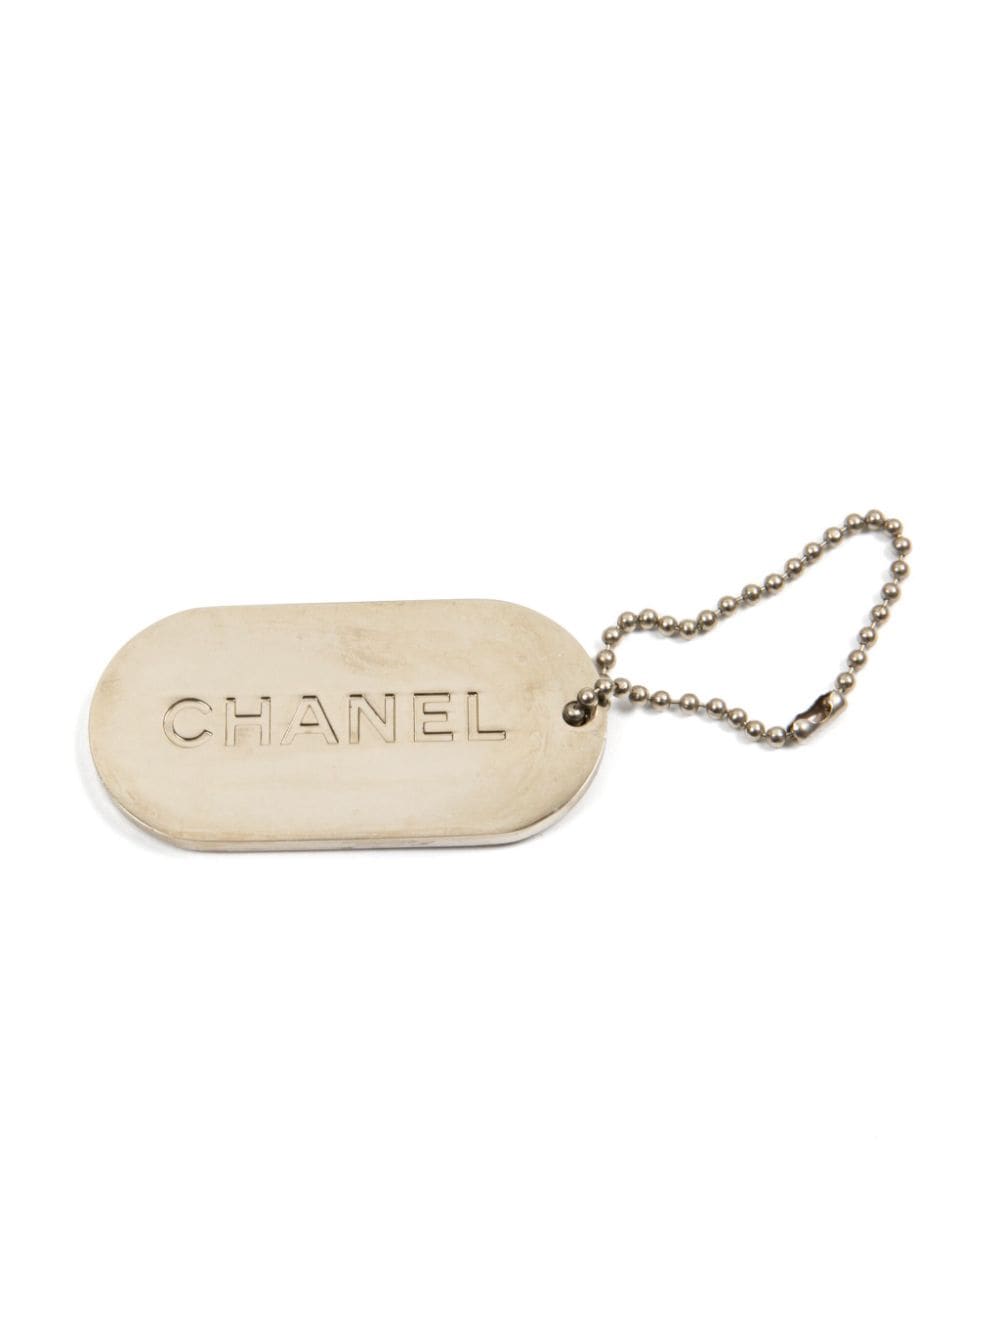 CHANEL Pre-Owned 2000s logo-engraved key ring - Beige